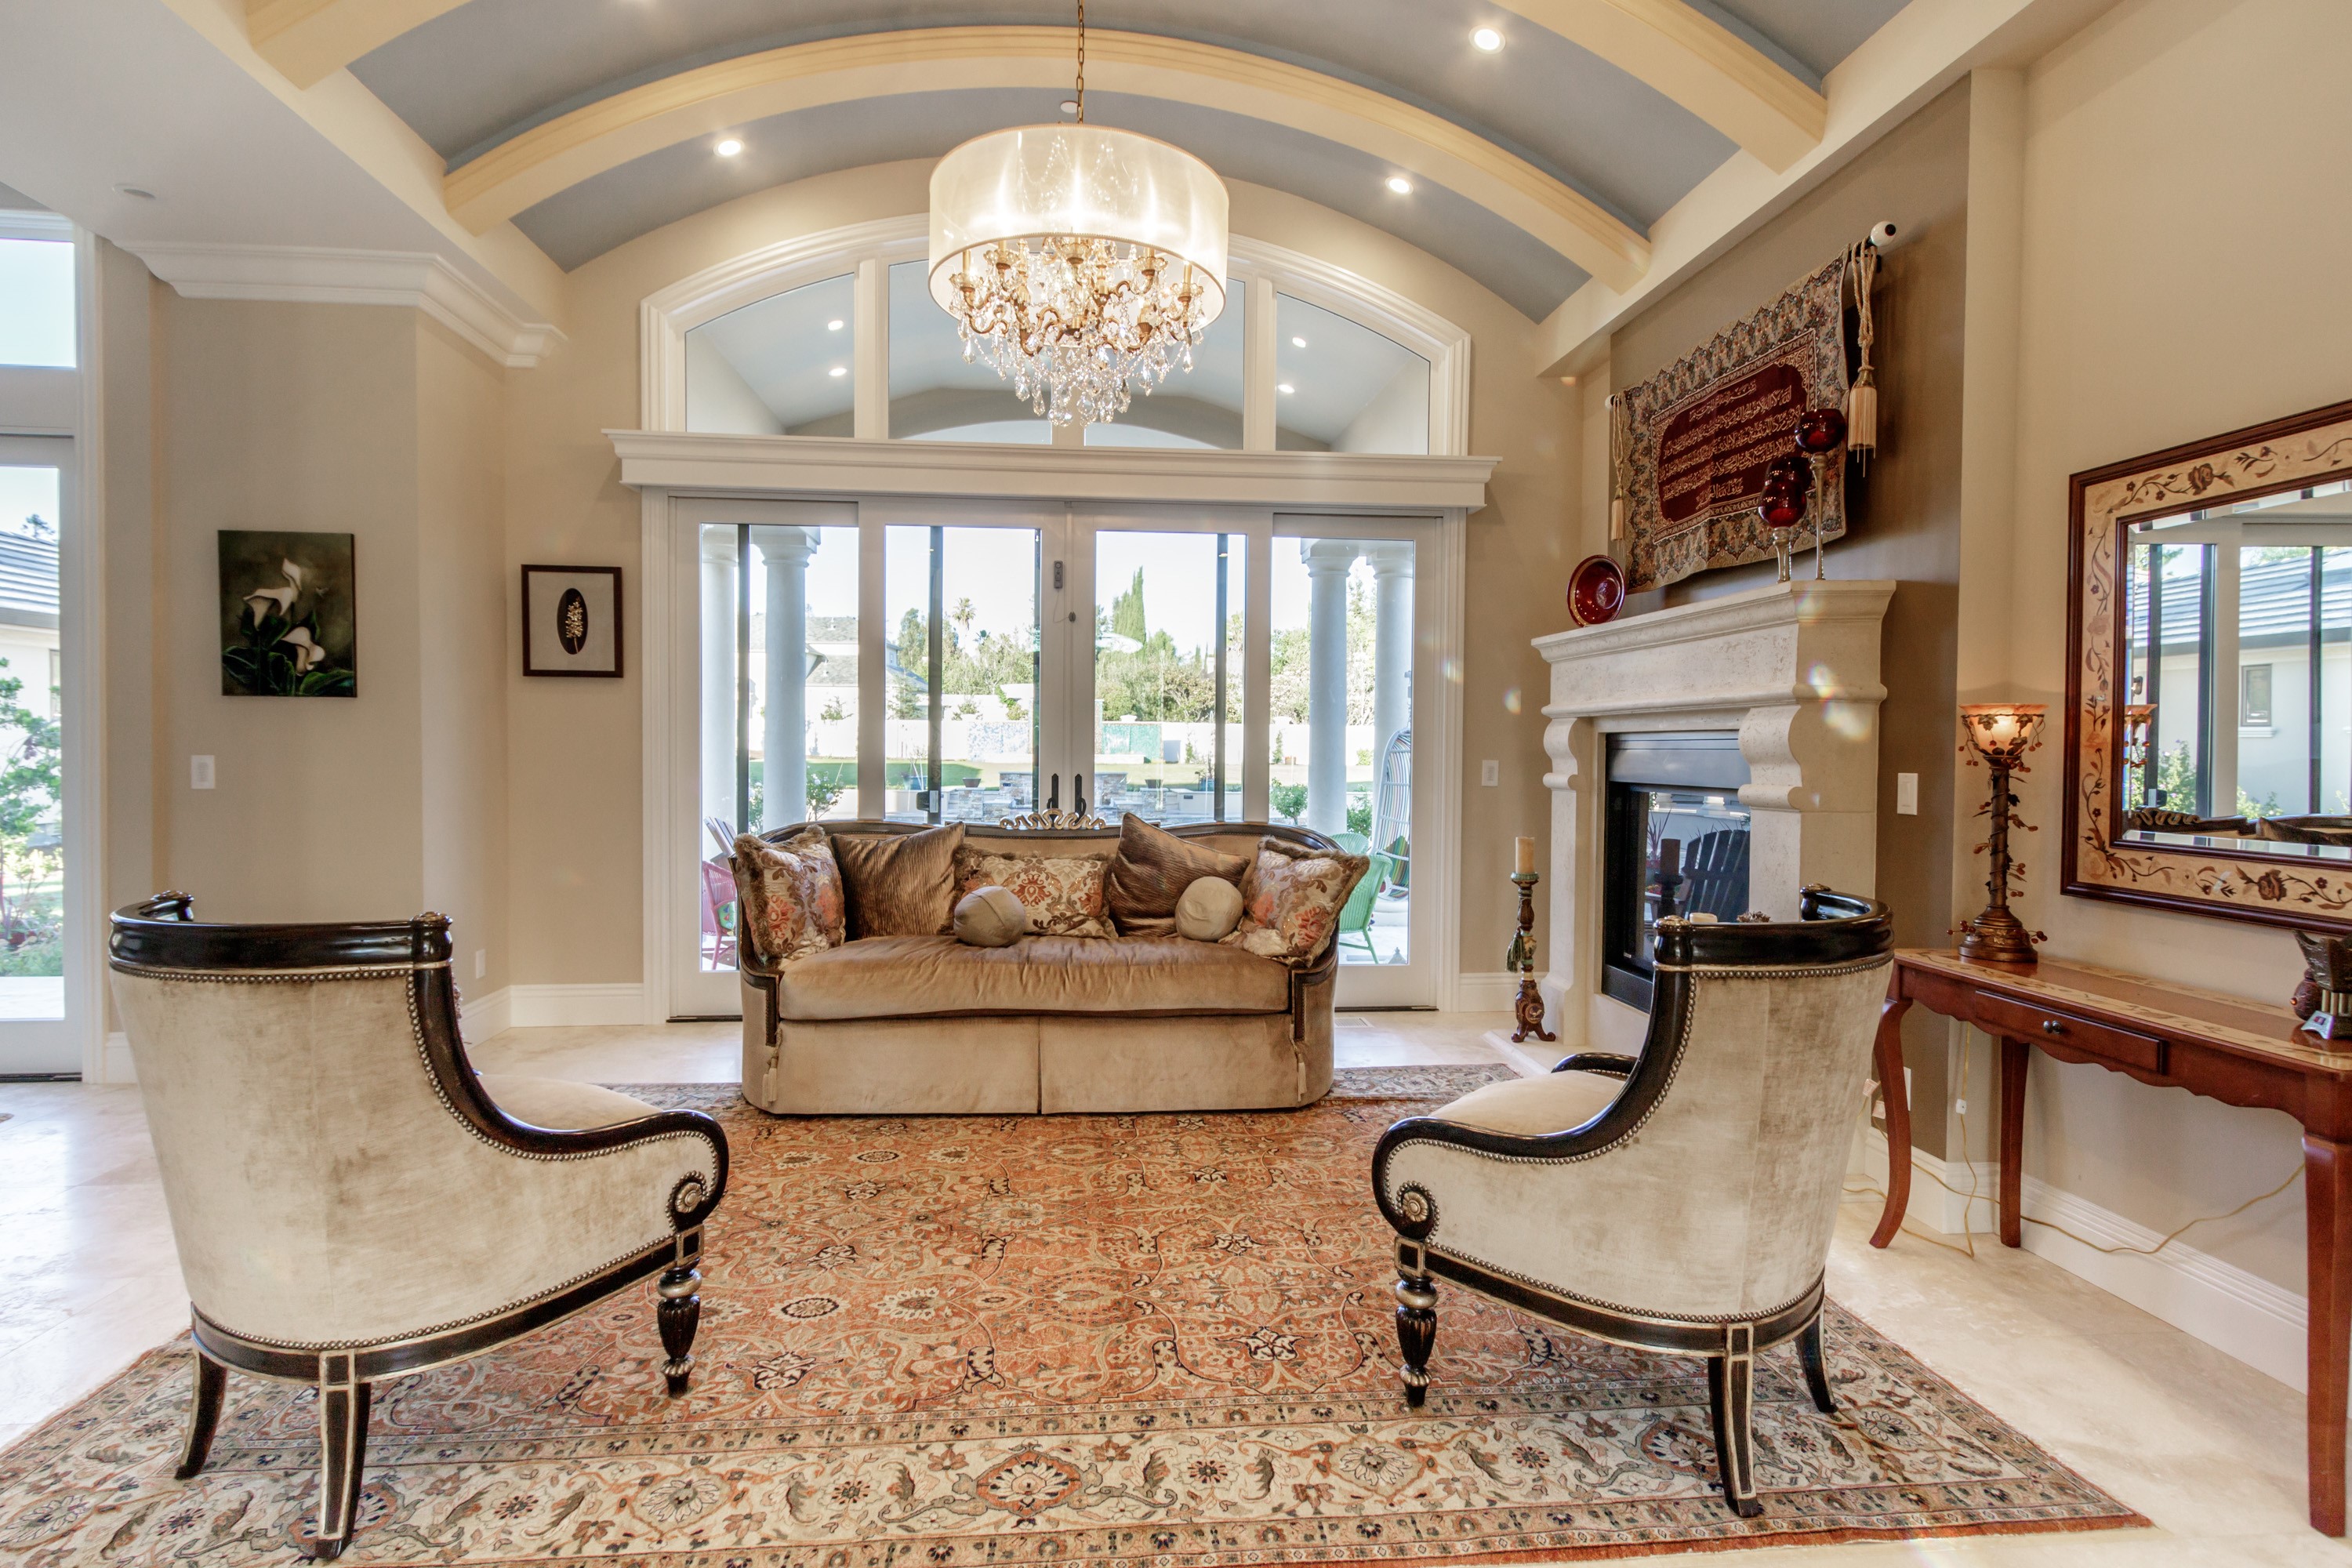 Luxurious interior designed for custom homes built in Cupertino